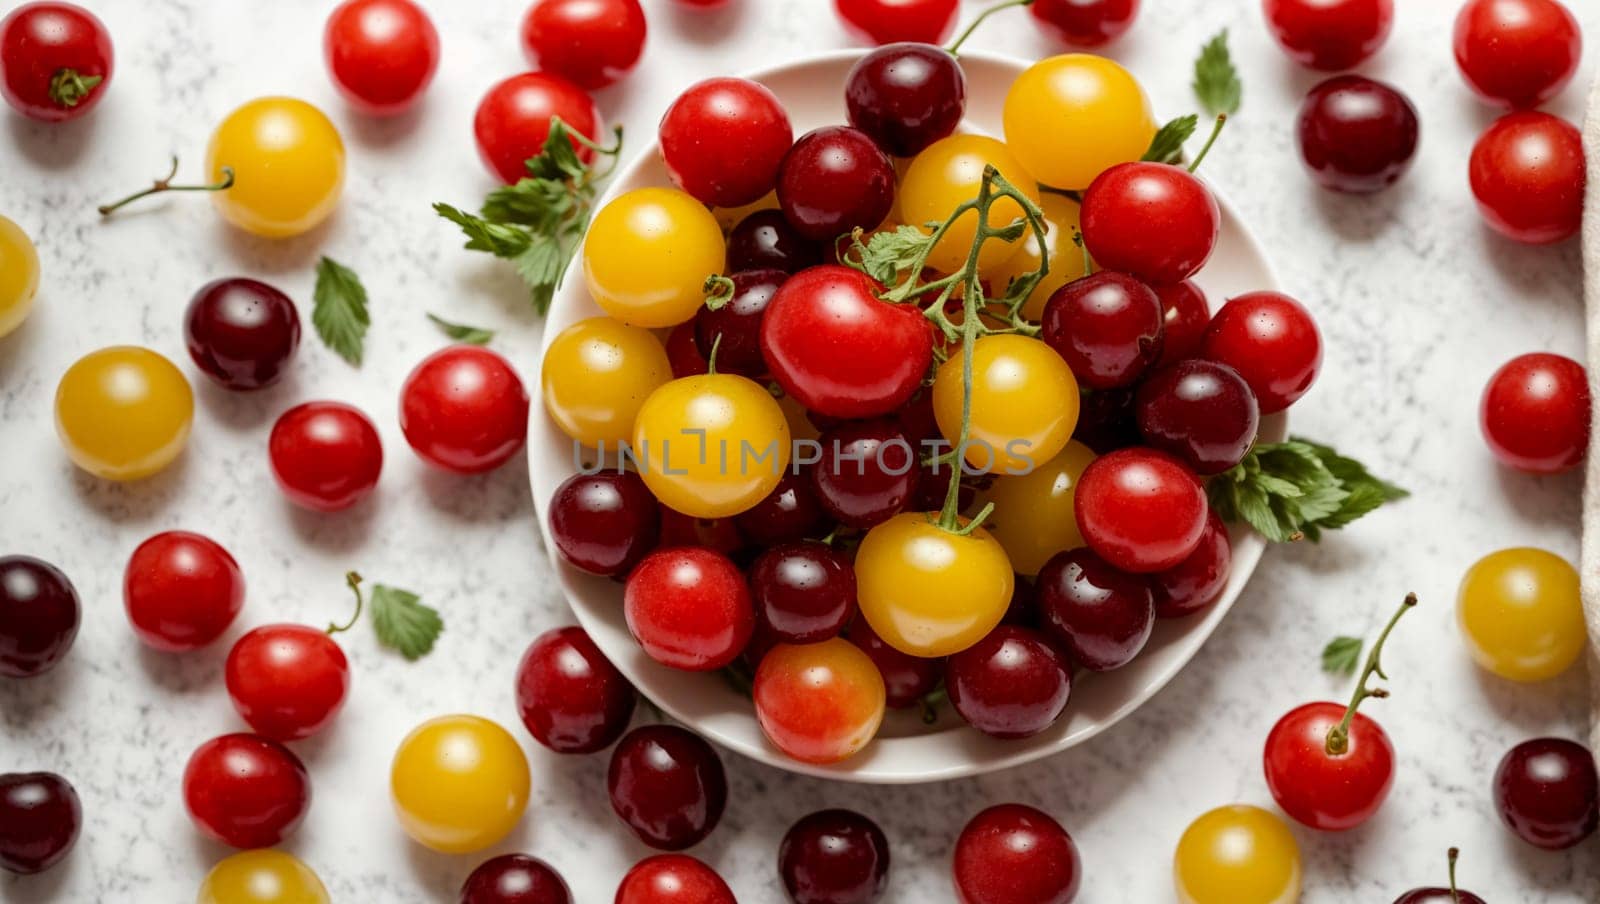 cherry berries, grapes, red and yellow tomatoes on a white background by Севостьянов